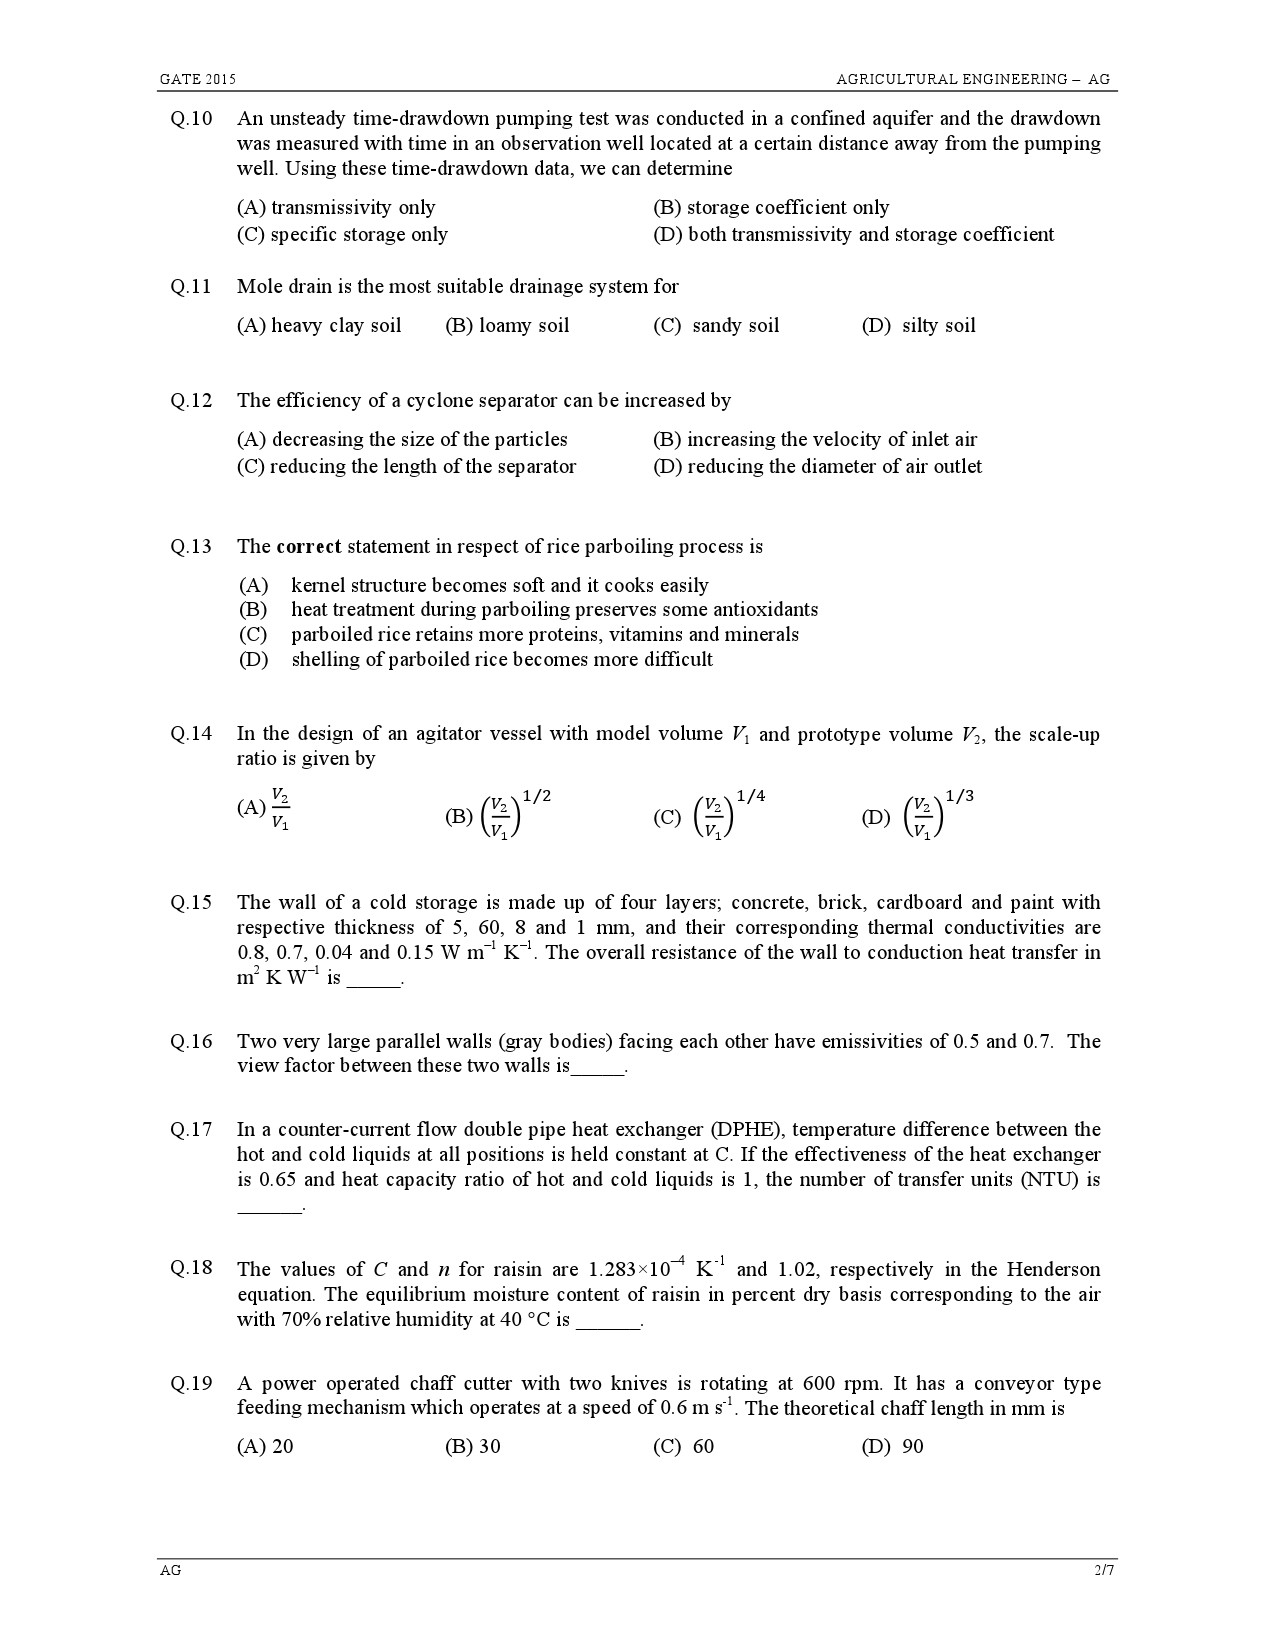 GATE Exam Question Paper 2015 Agricultural Engineering 2